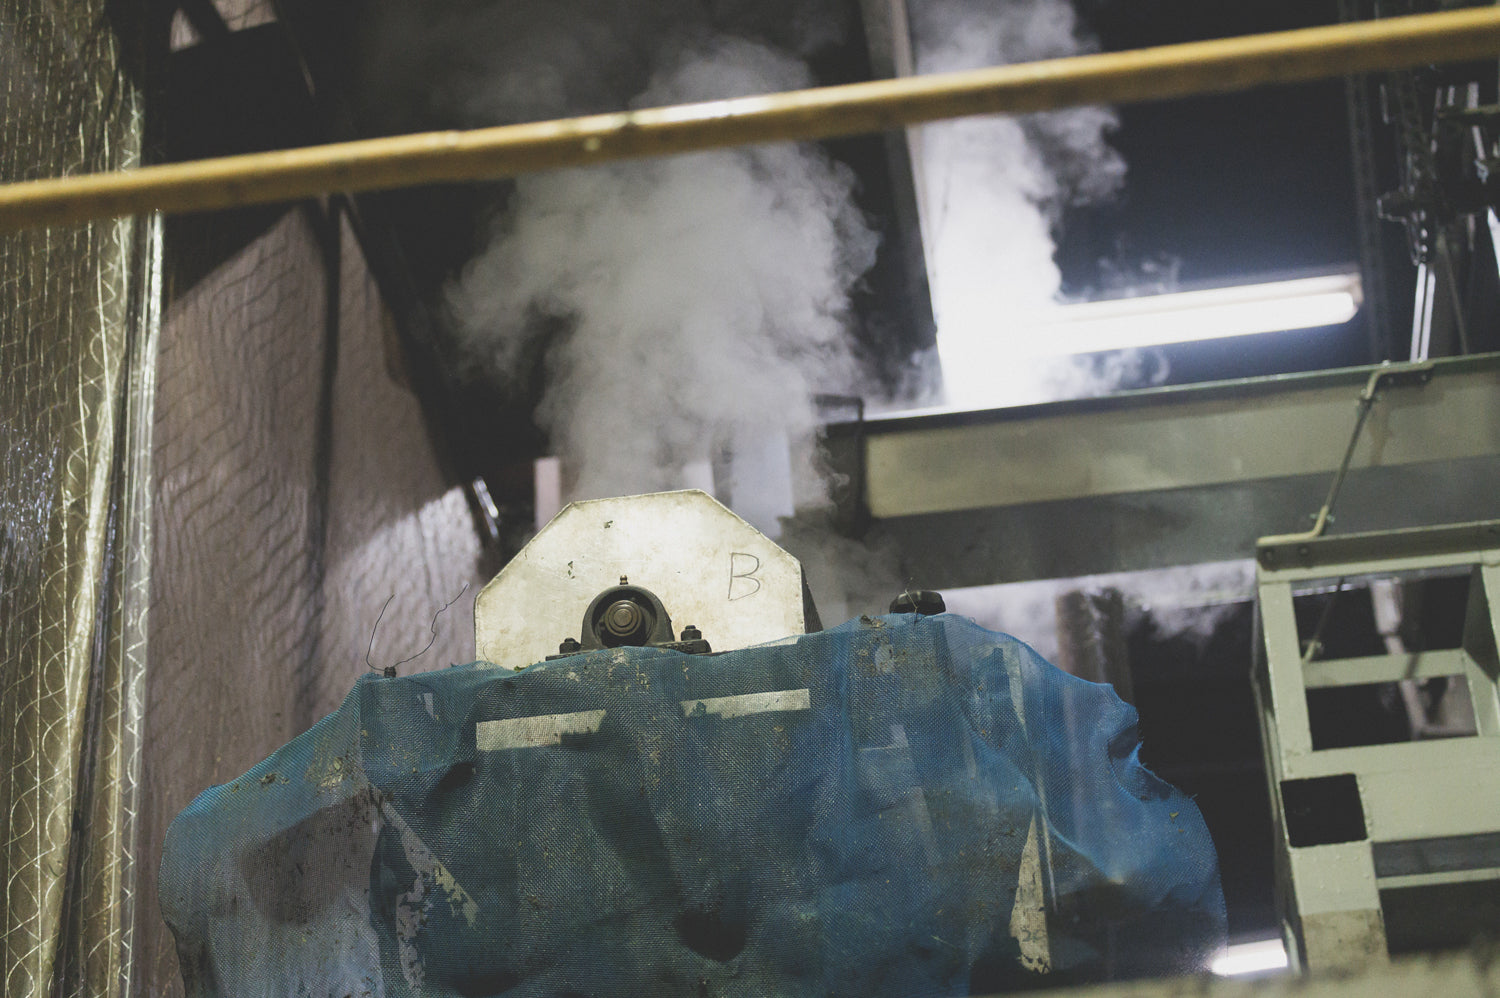 A moist cloud billows out of the machine in which matcha tea leaves are steamed.